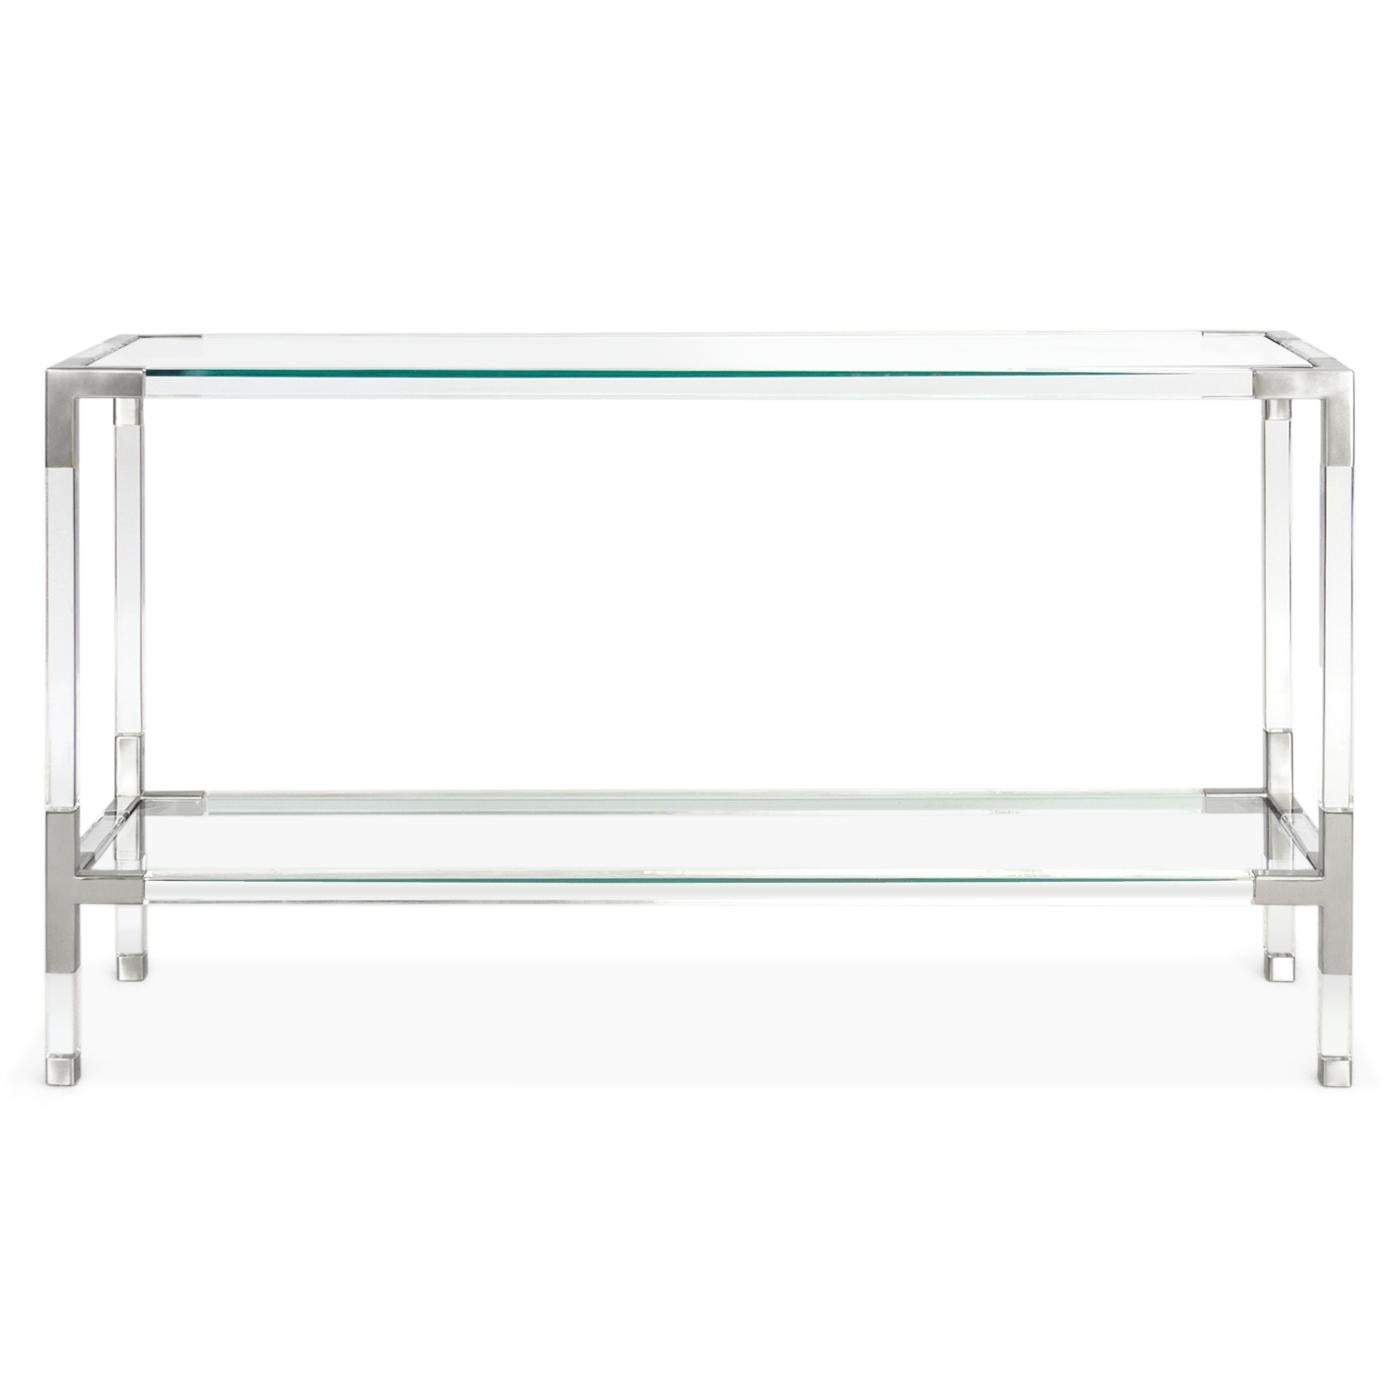 Clearly cool. Our Jacques collection is the perfect blend of simplicity and glamour, modern and traditional, in crystal clear Lucite with polished nickel corners. Fitted with a low glass shelf for baubles or books, our Jacques console works